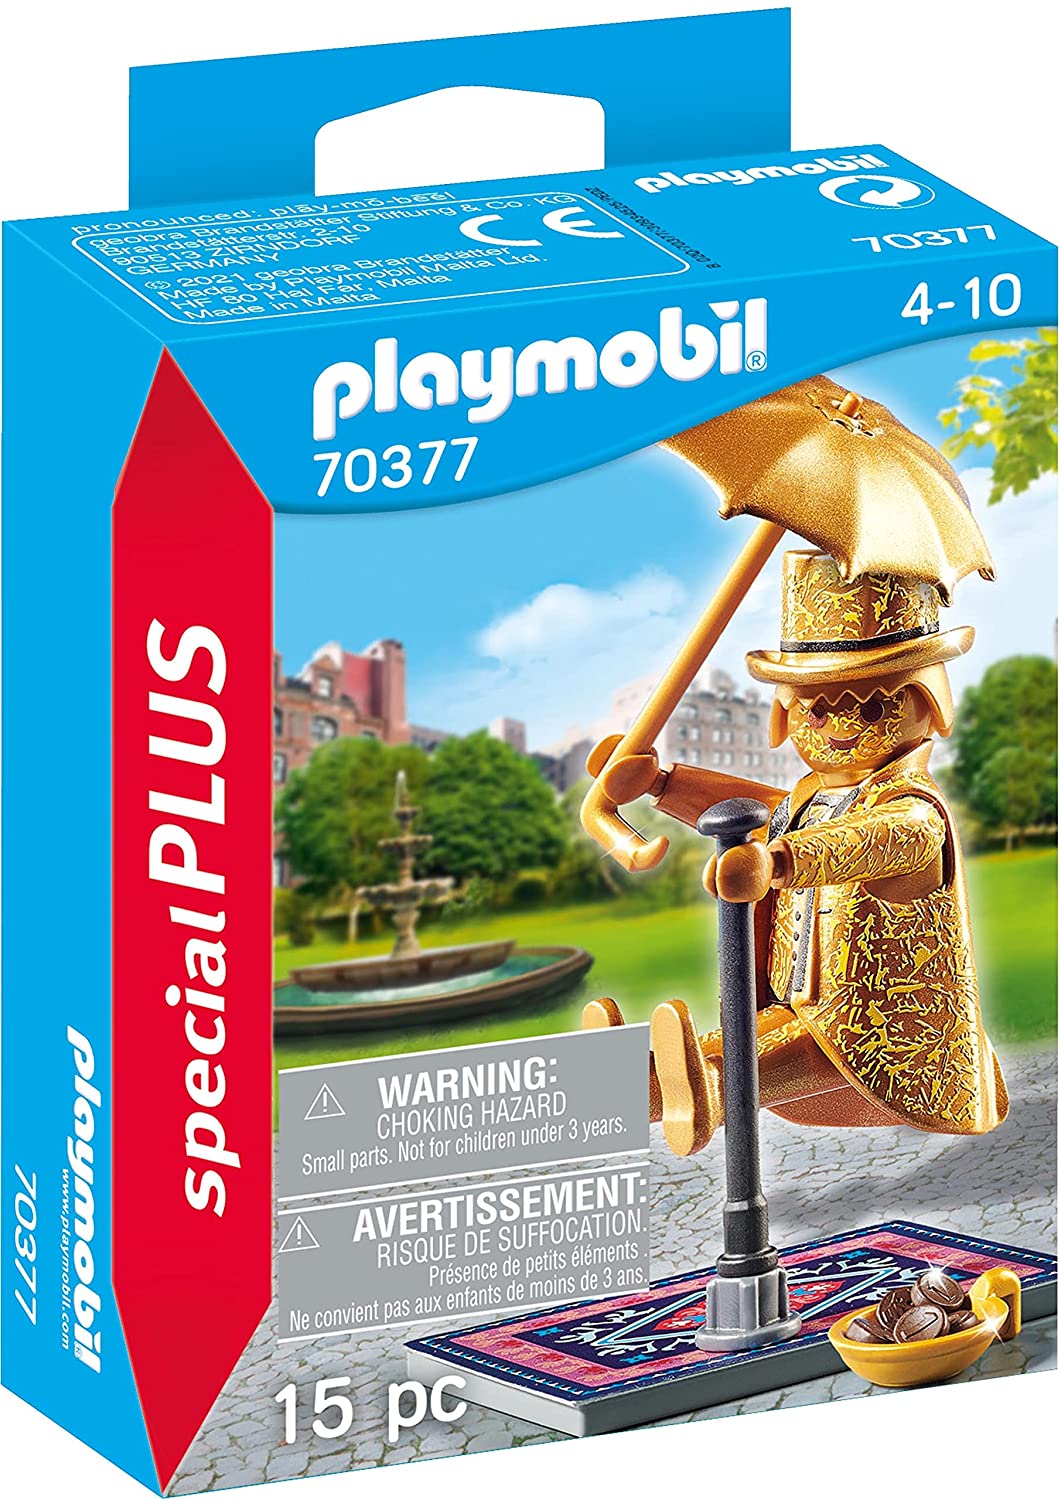 Playmobil 70377 Toys, Multicoloured, One Size